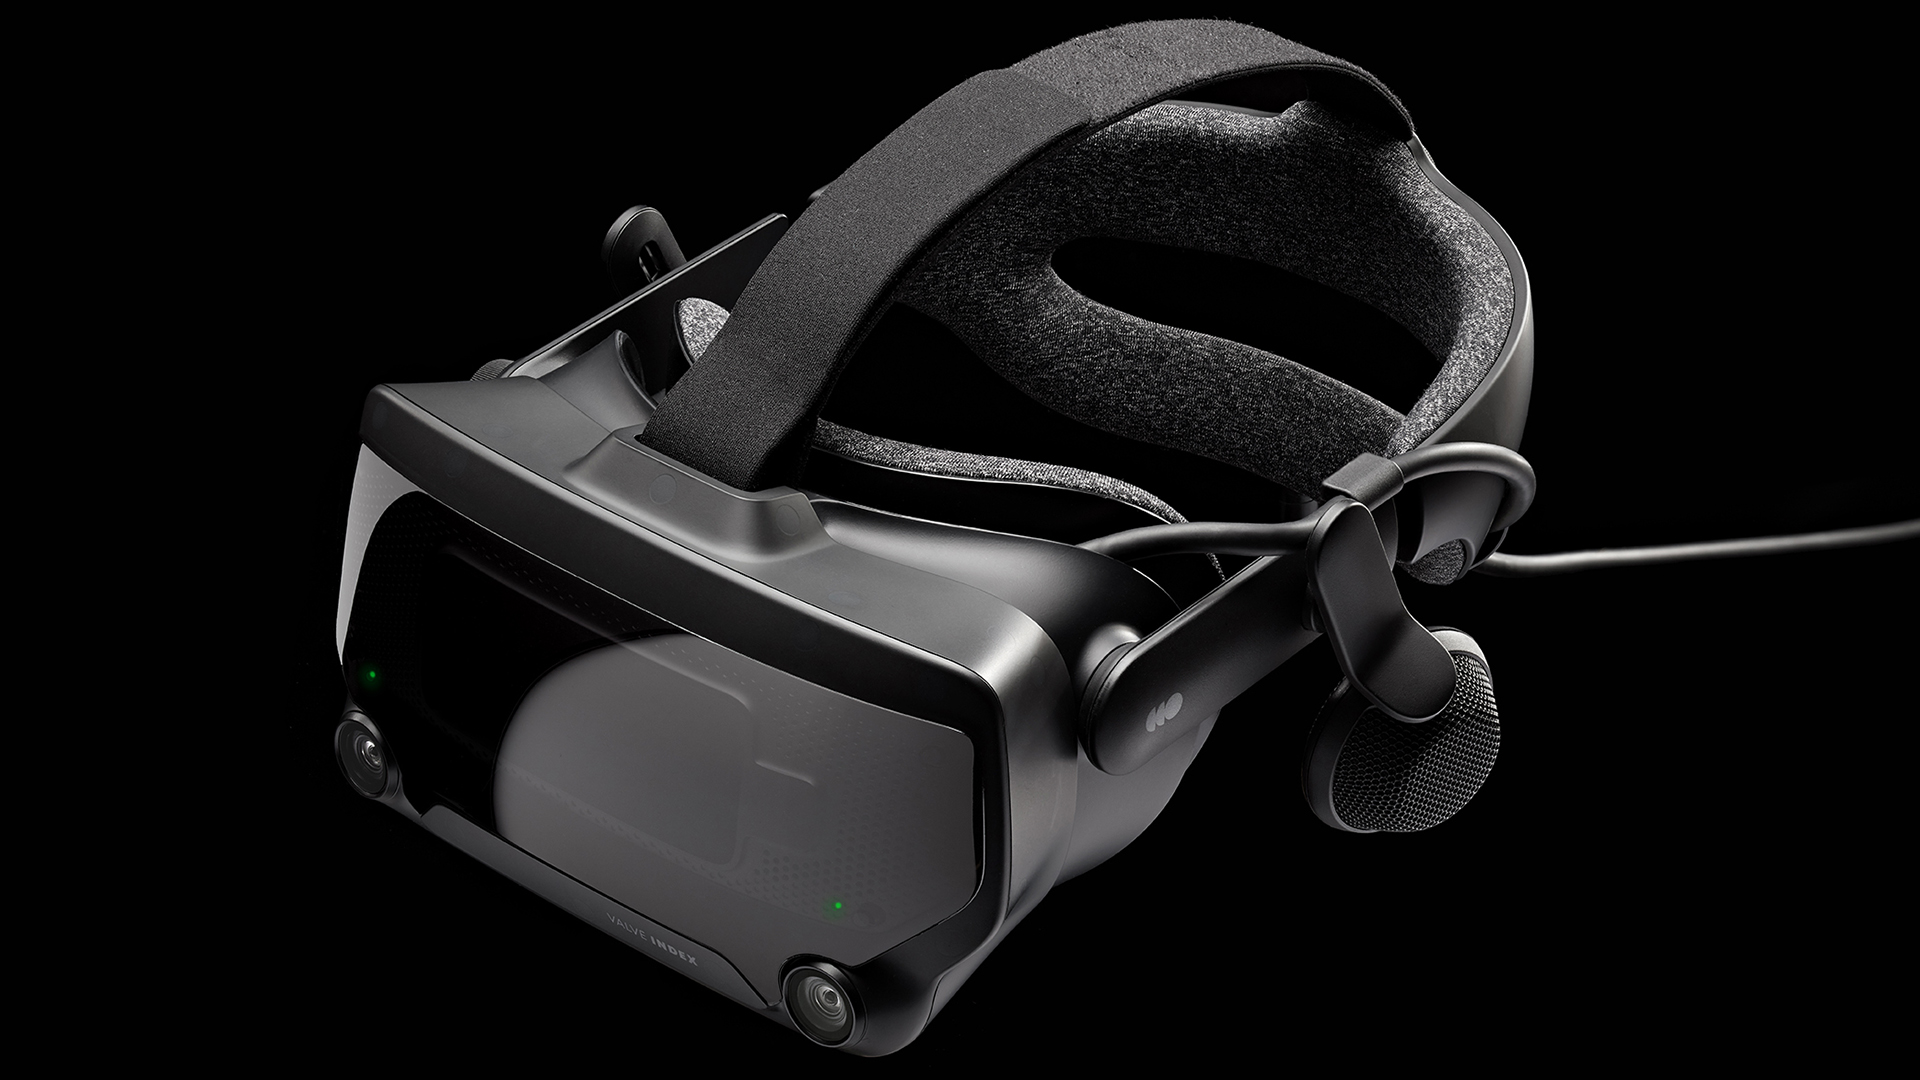 A render image of the Valve Index